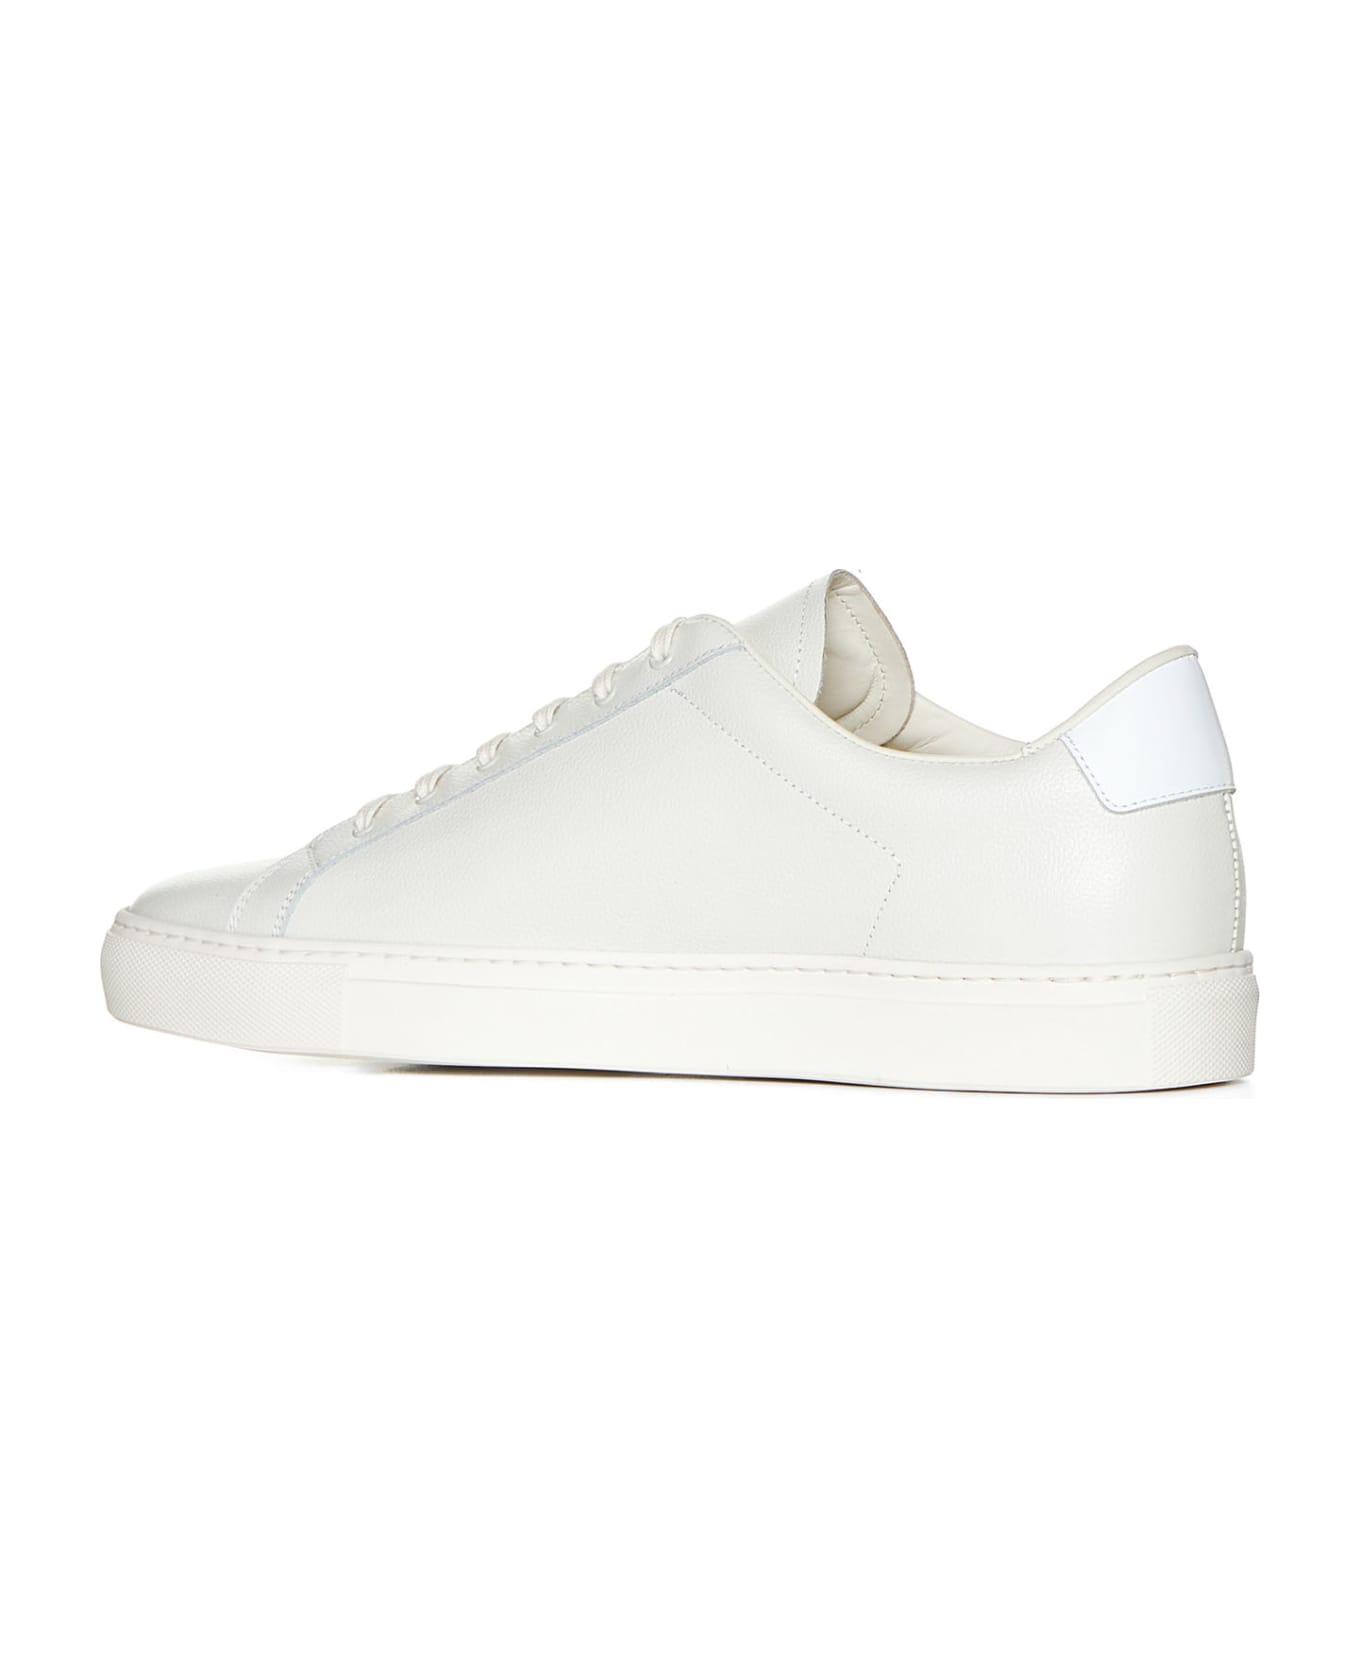 Common Projects Retro Bumpy Leather Sneakers - Vintage white